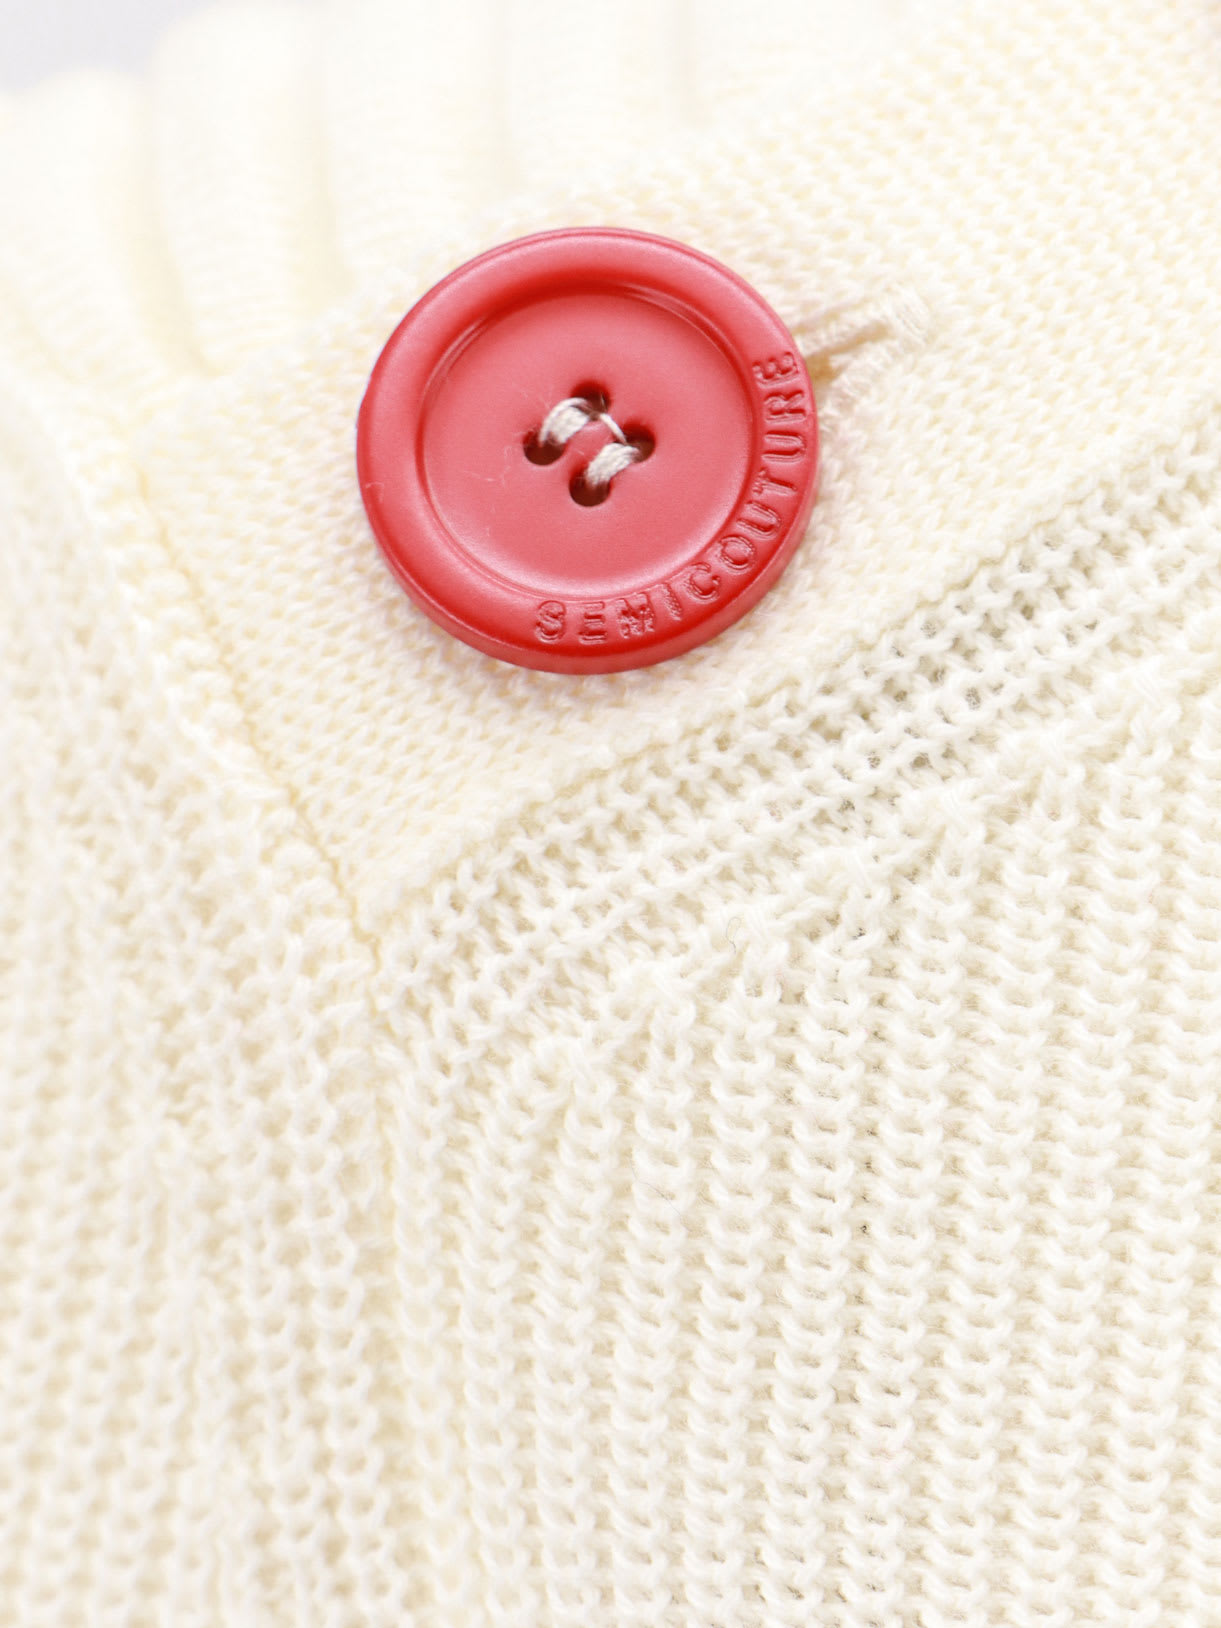 Shop Semicouture Sweater In Bianco Rosso